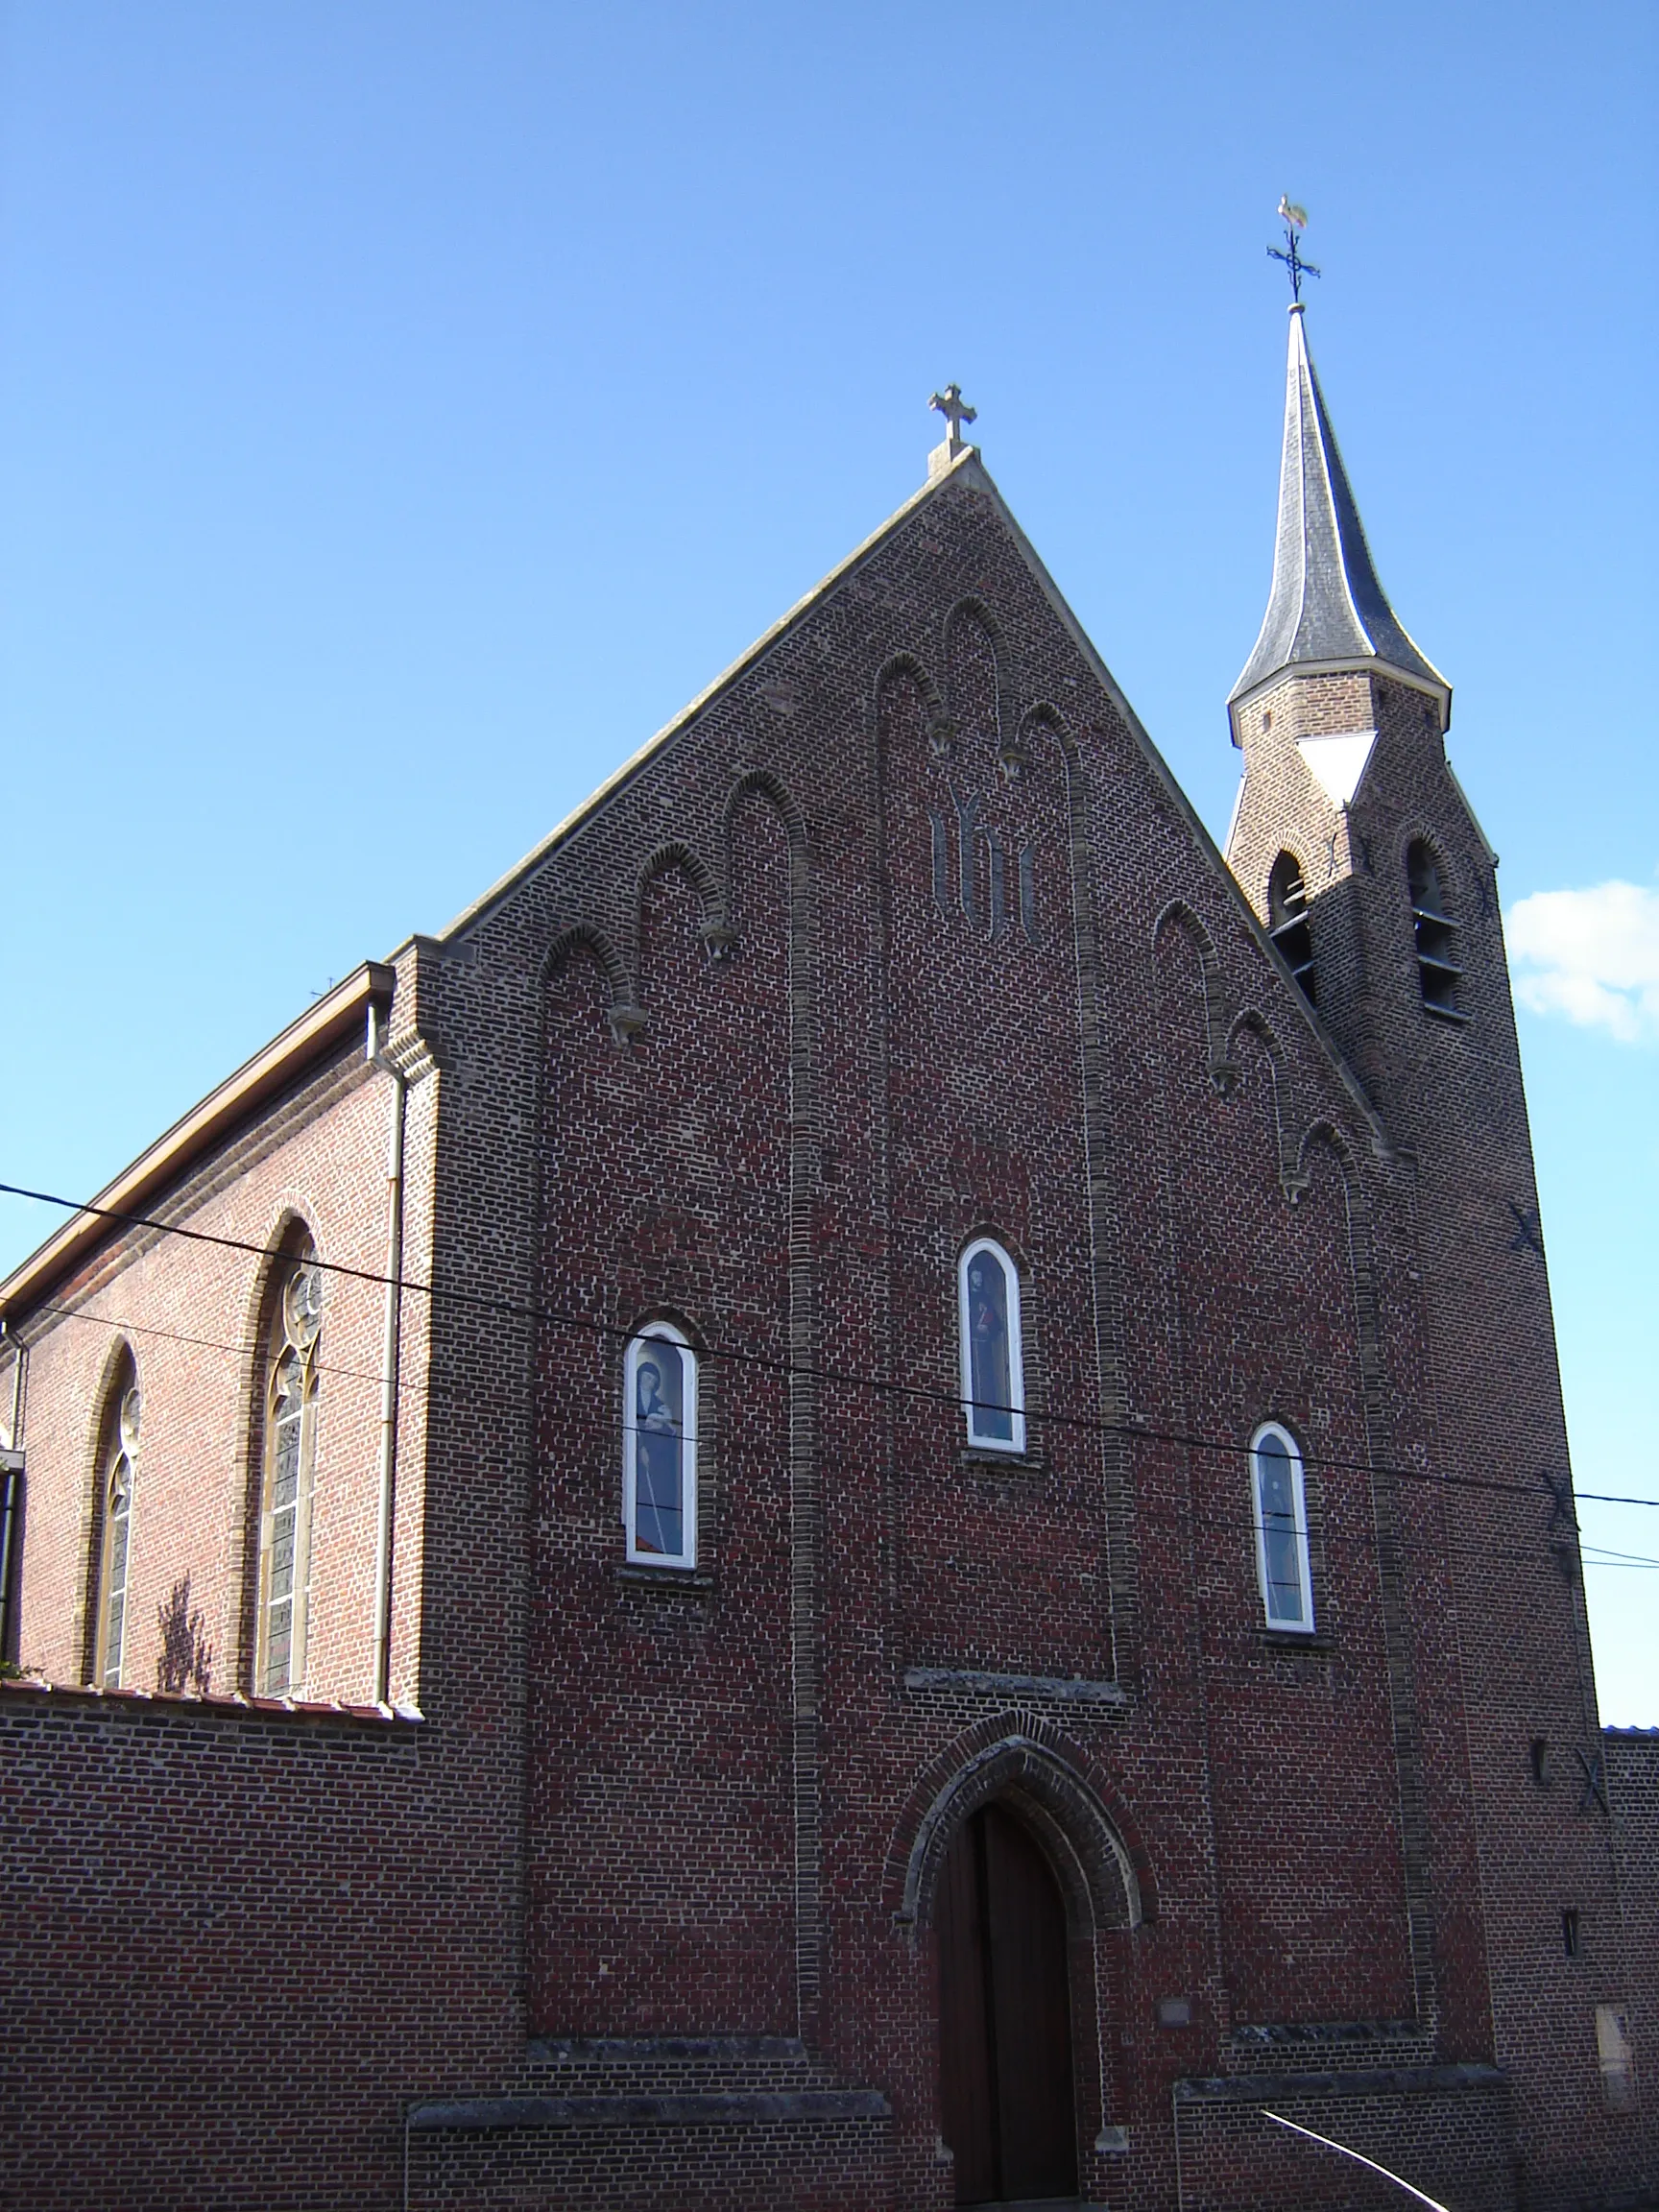 Photo showing: Church of the convent "Our Lady of the Angels" of the Poor Clares in Roeselare, West Flanders, Belgium